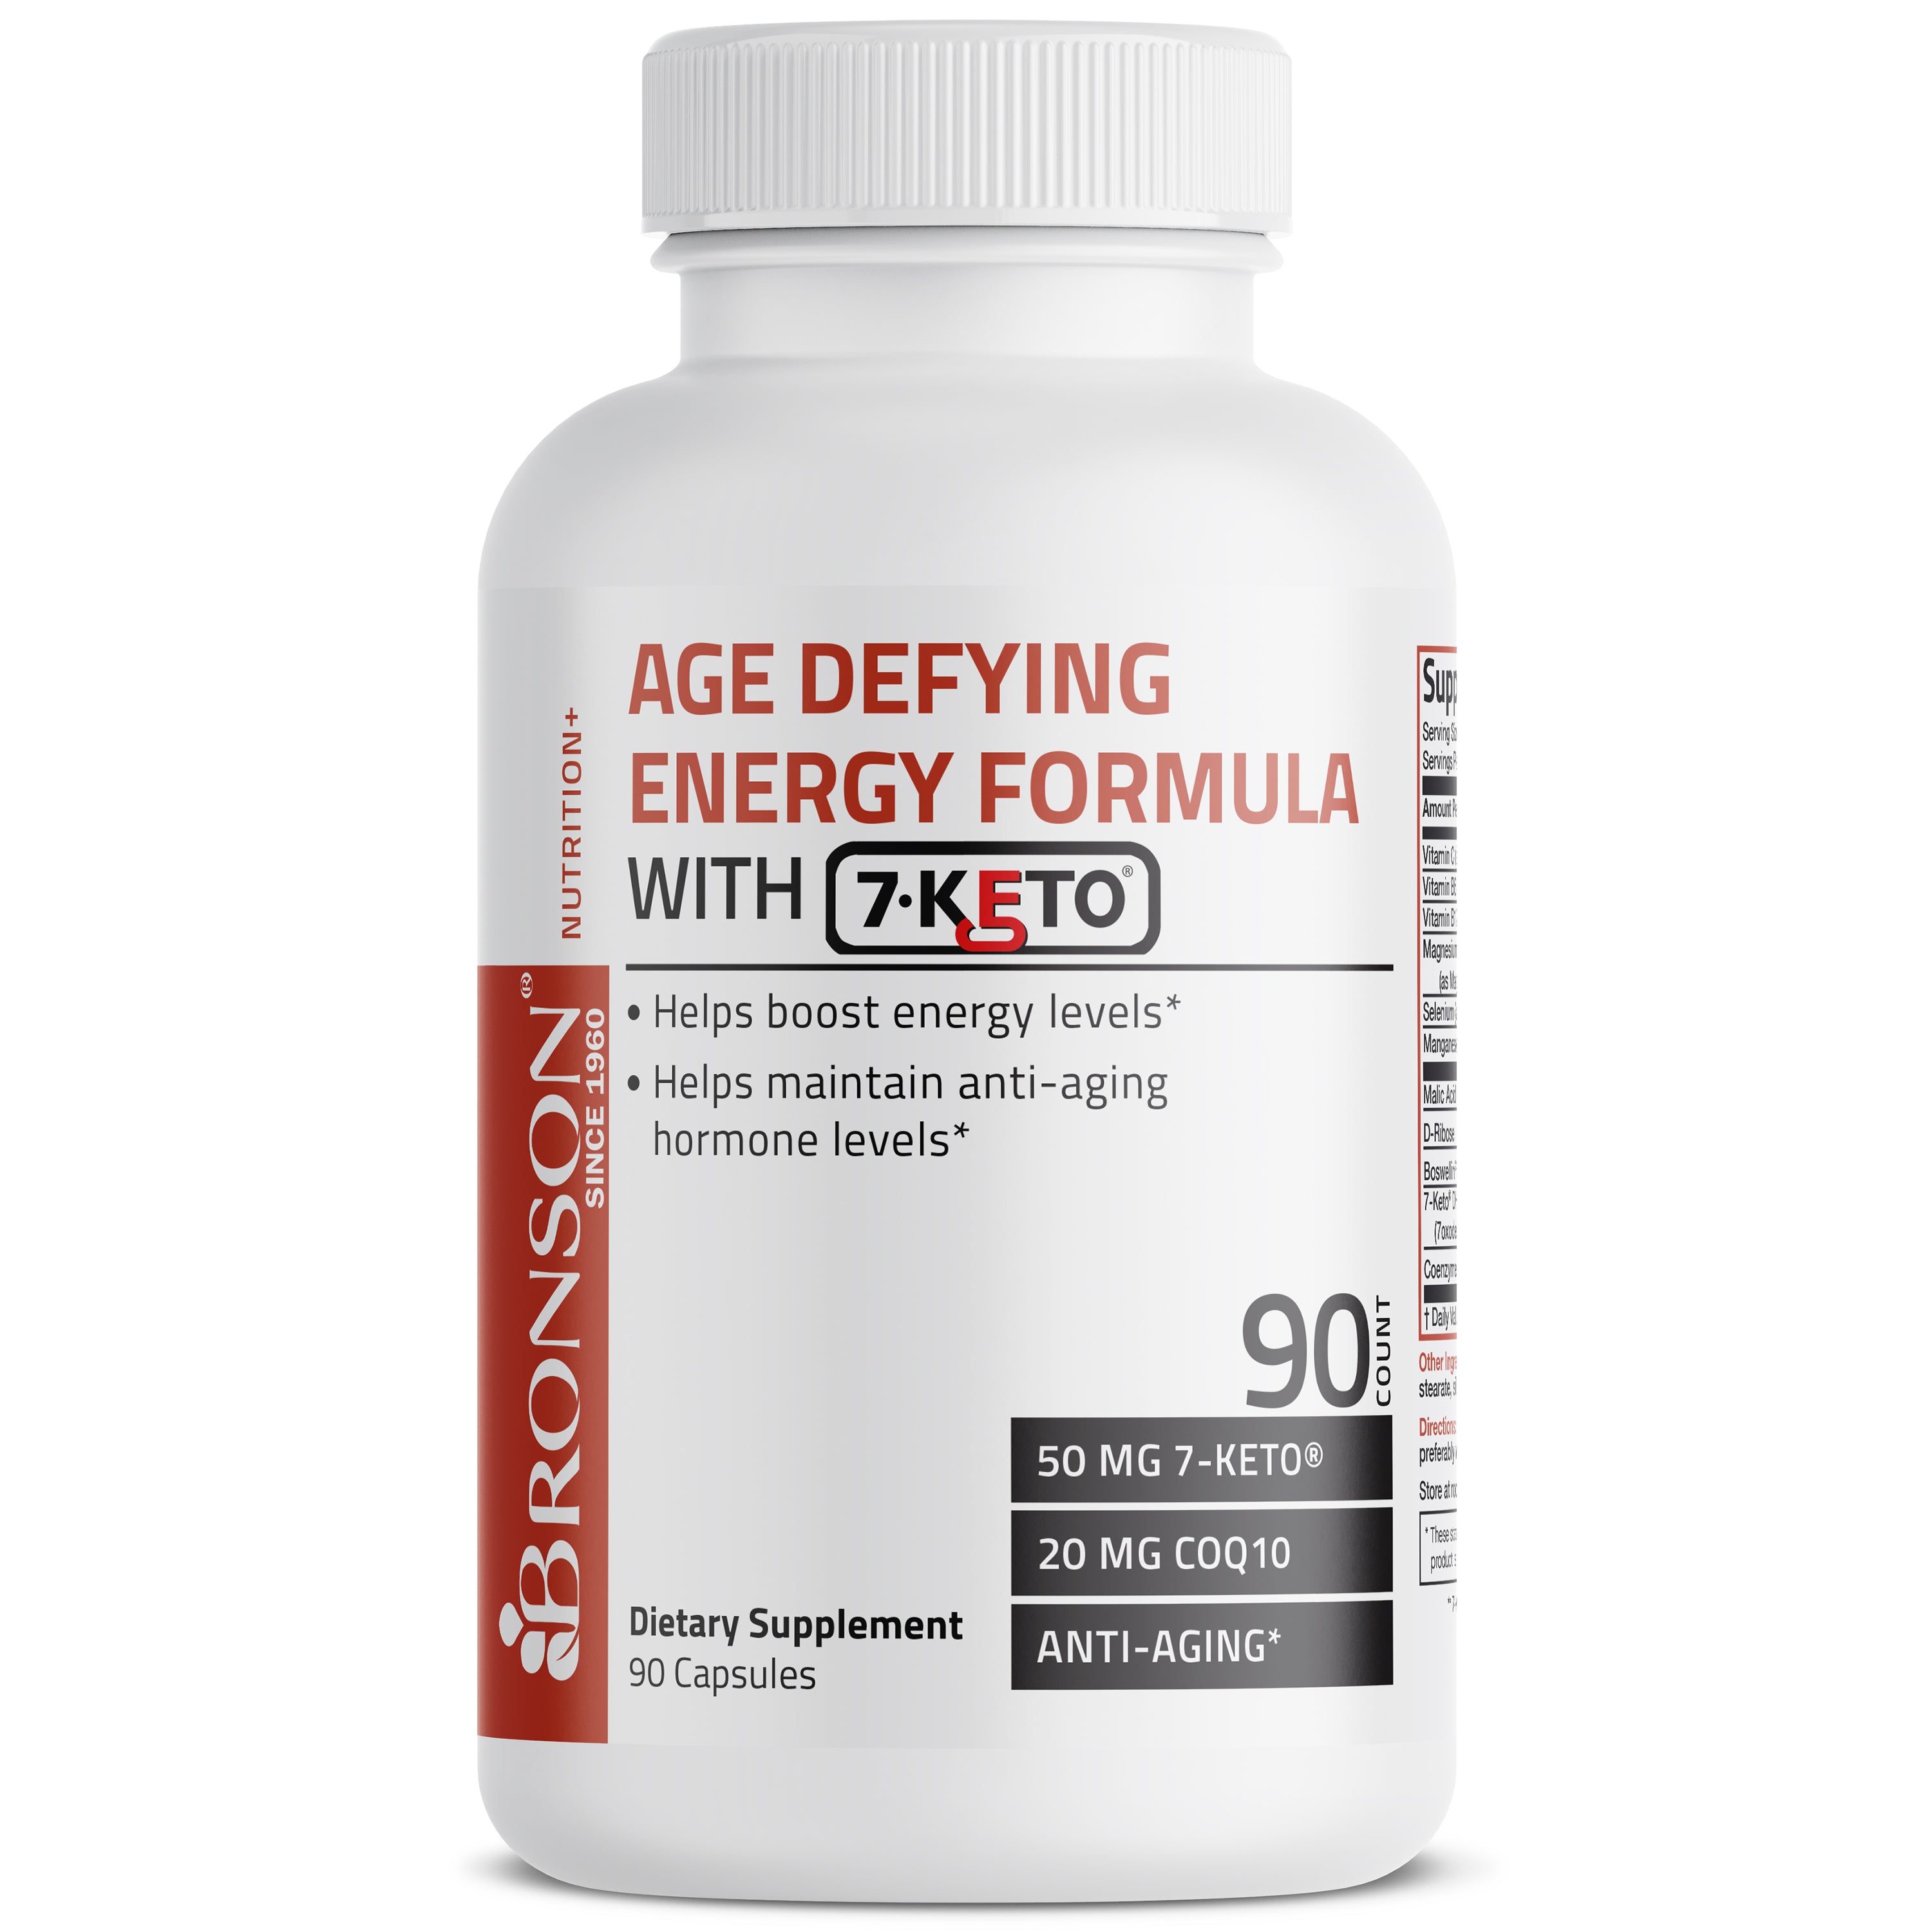 Age Defying Energy Formula with 7-Keto® DHEA - 90 Capsules view 1 of 4